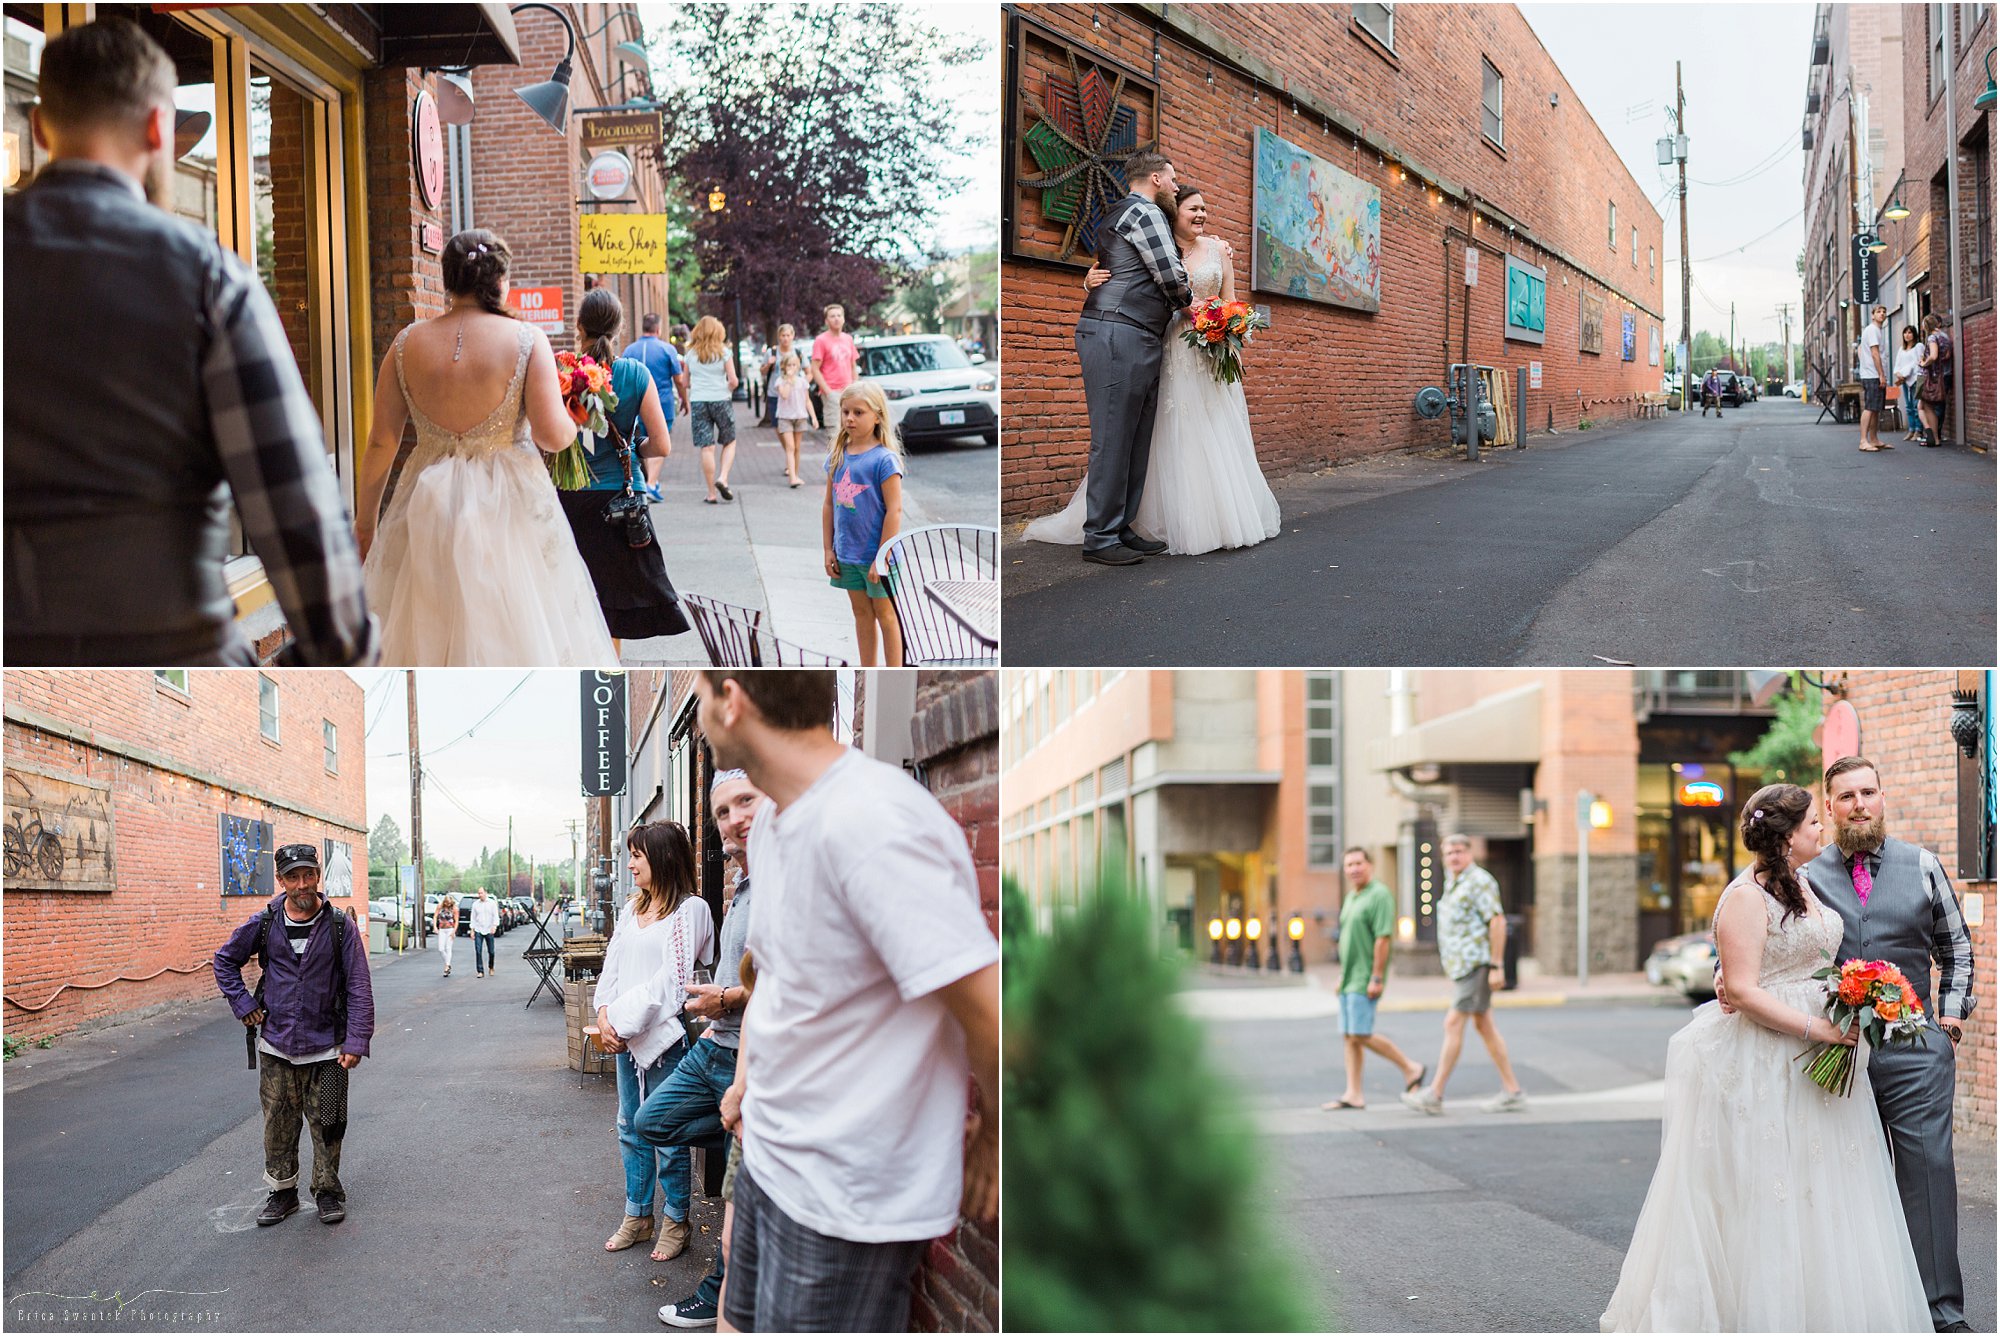 Some behind the scenes photos from a downtown Bend OR wedding. | Erica Swantek Photography